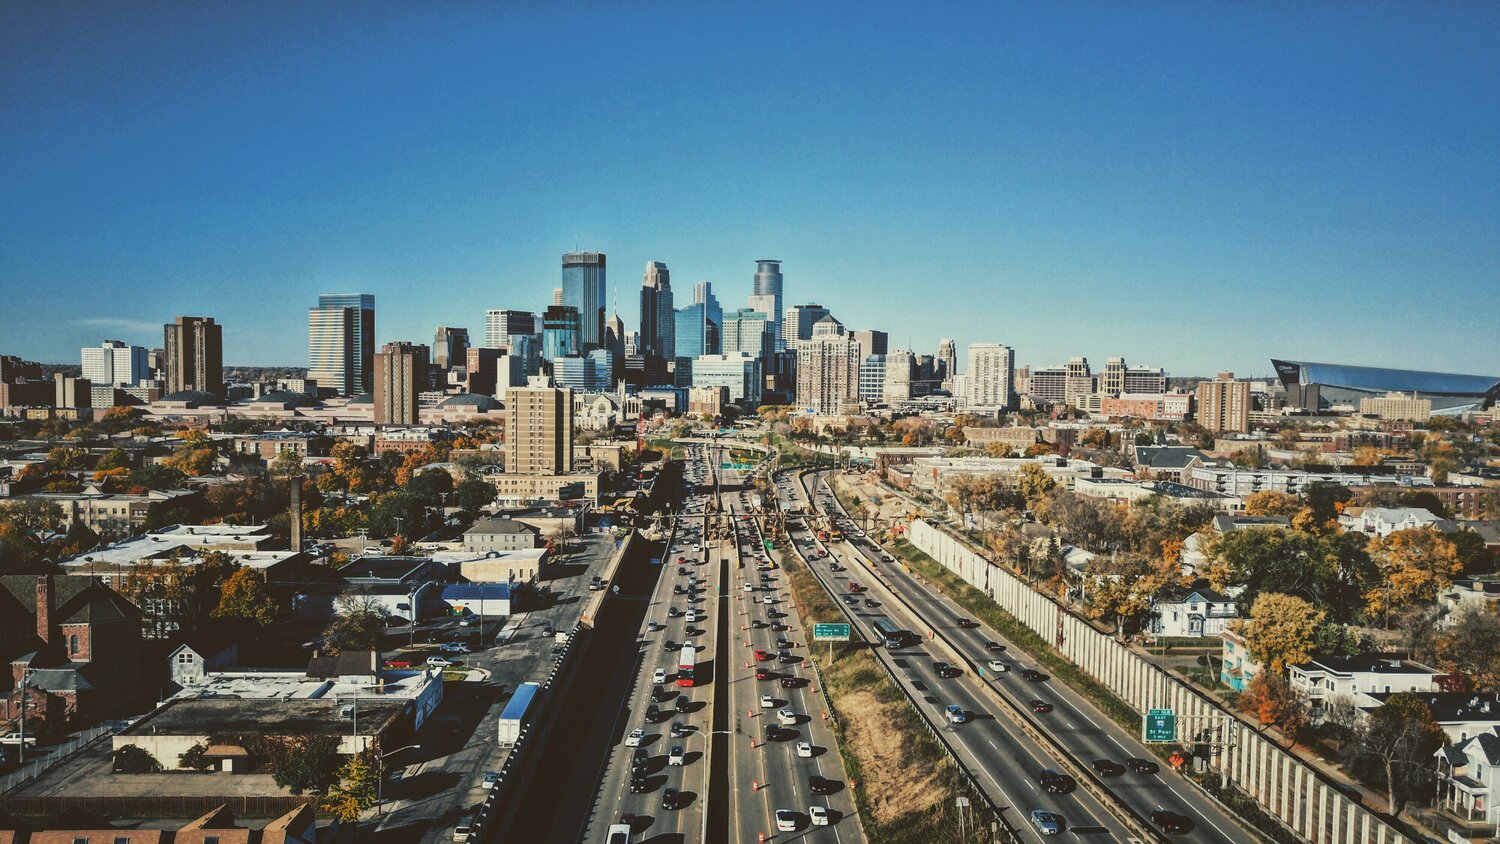 Minneapolis needs all hands on deck to create a connected city that works for everyone. (Daniel McCullough/Unsplash)